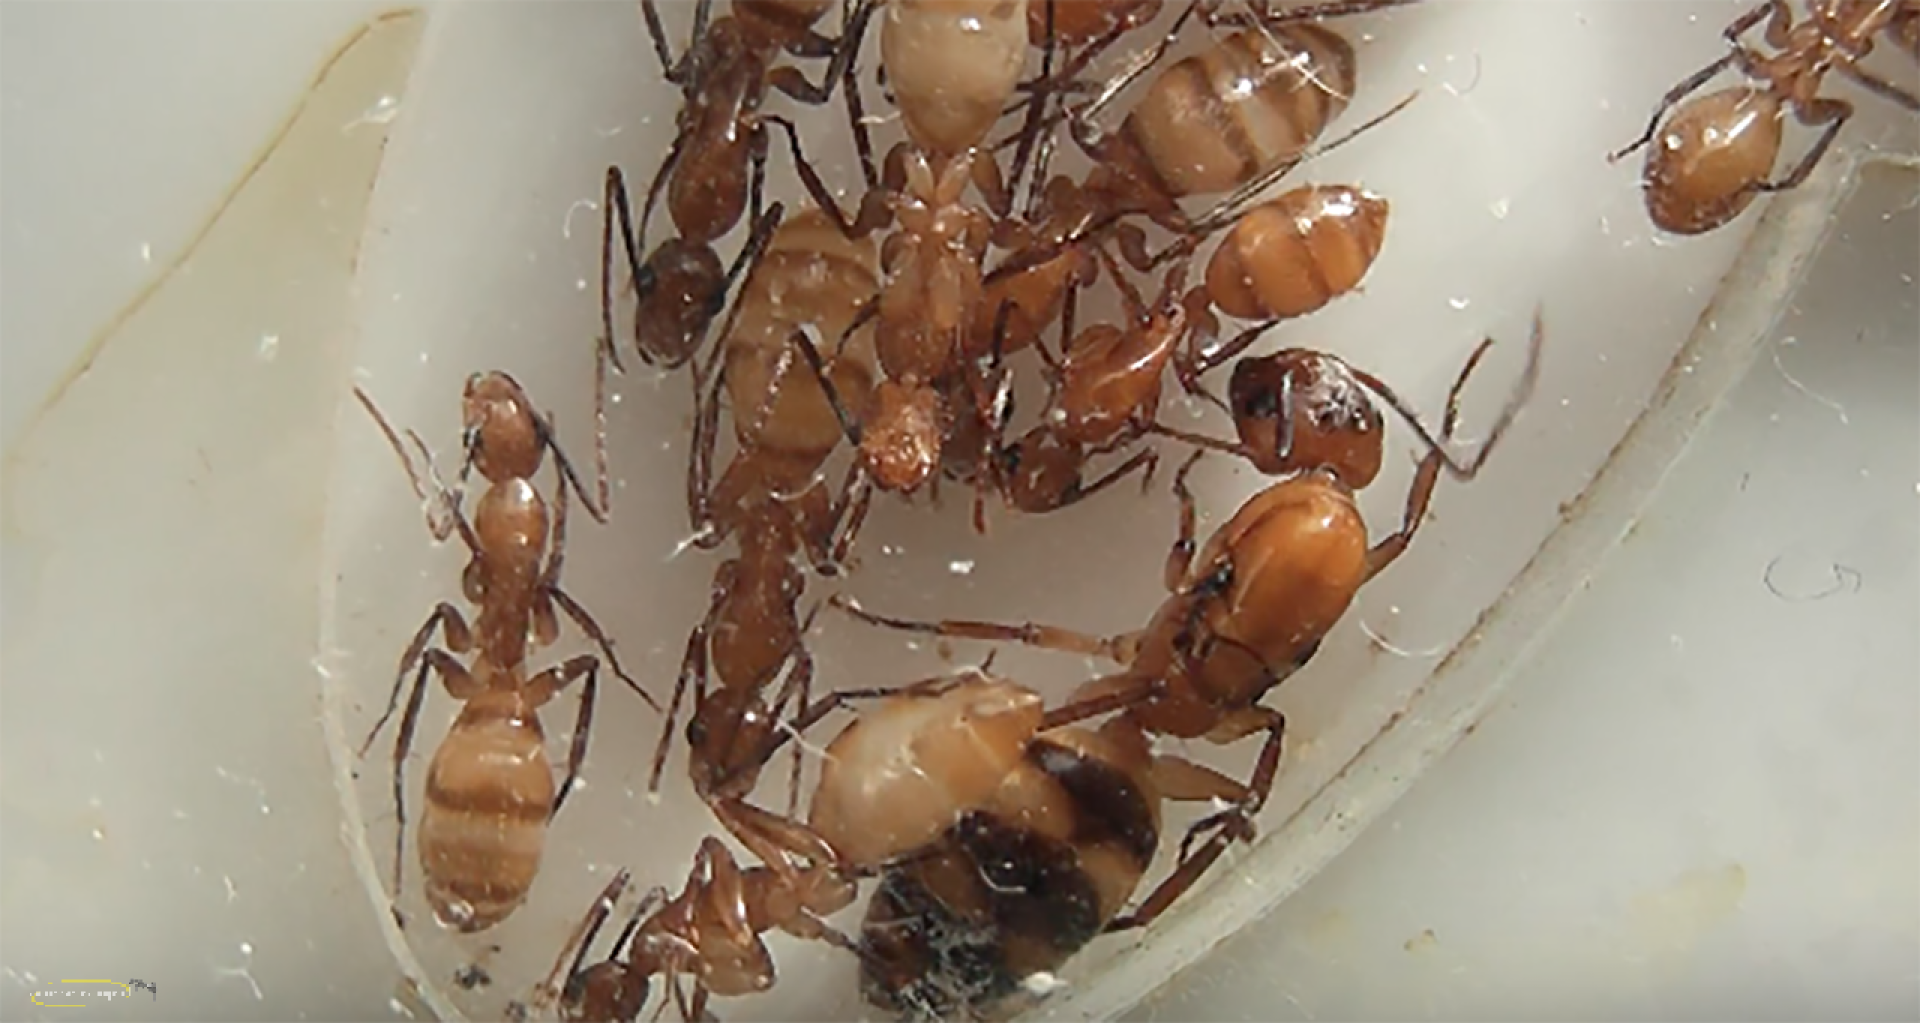 Camponotus substitutus - hell